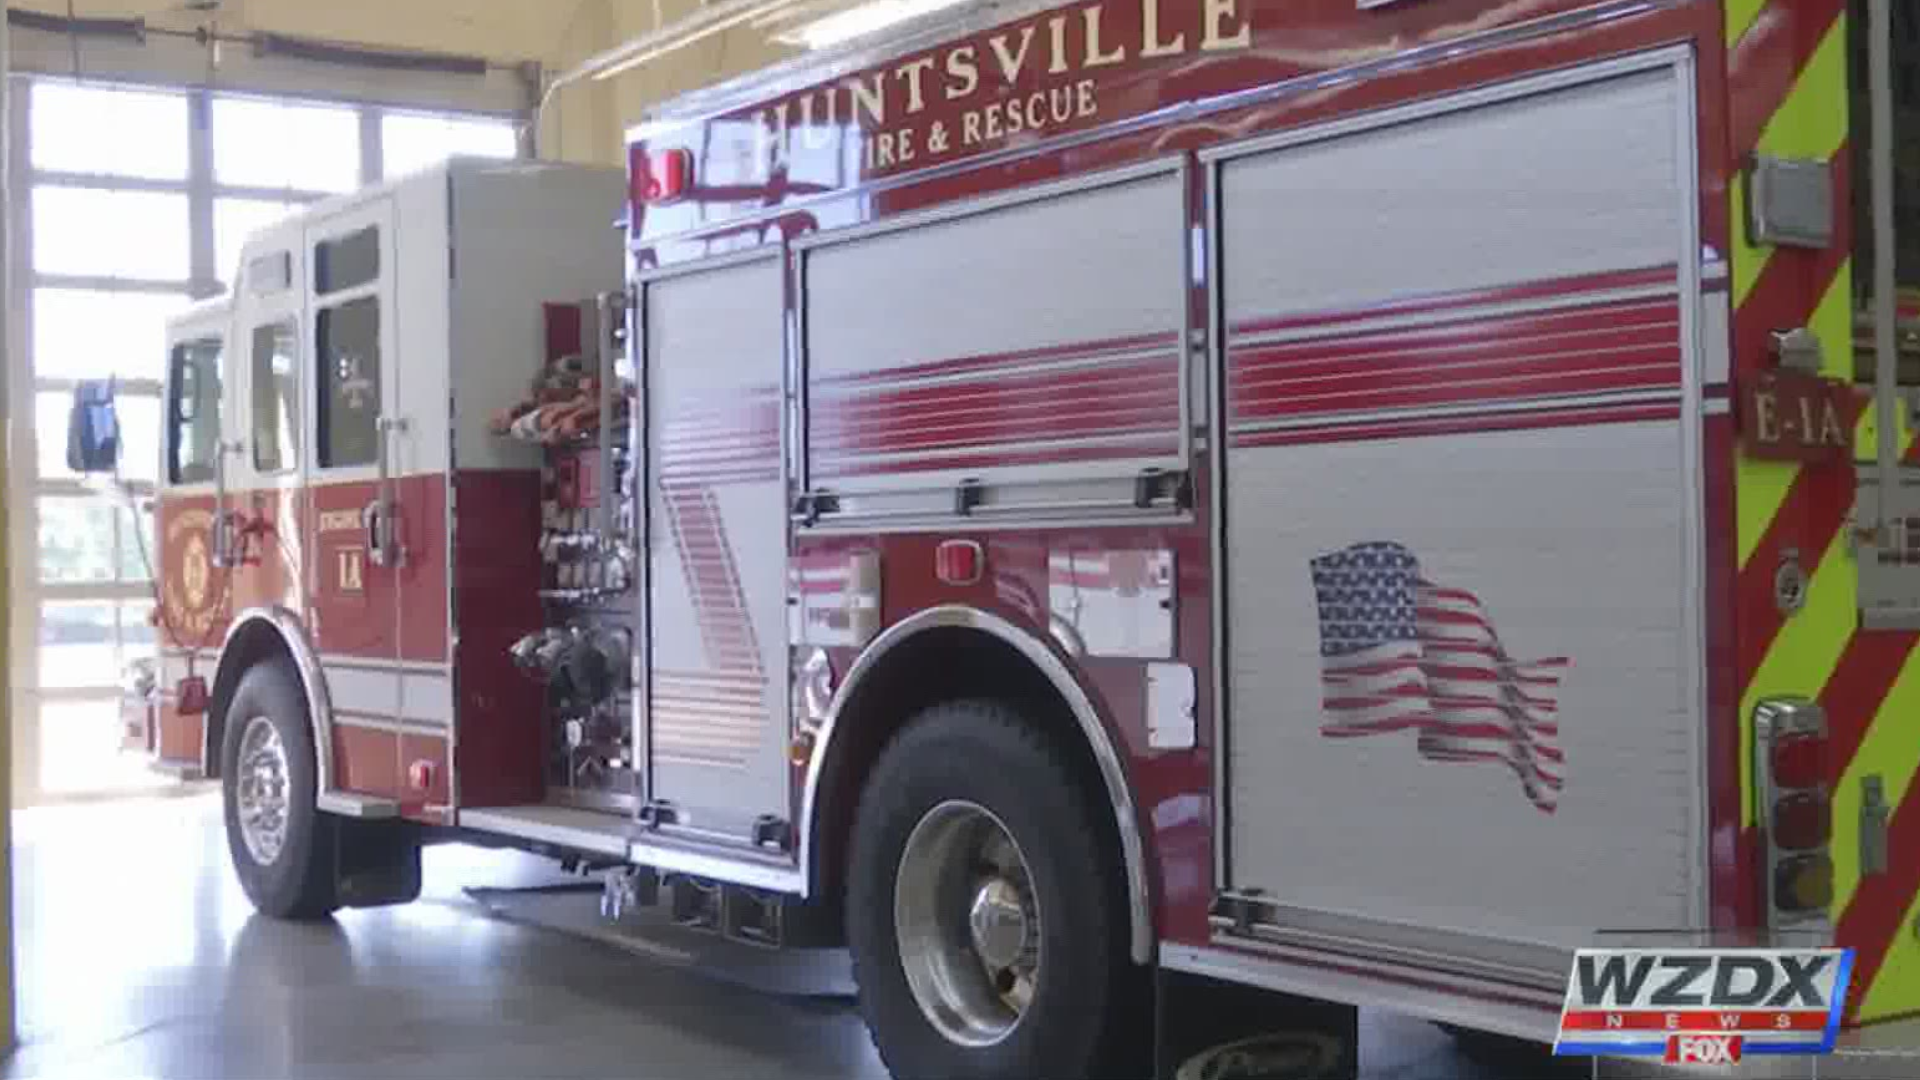 Unattended cooking is the leading cause of home fires. They make up about half of the fires in Huntsville.